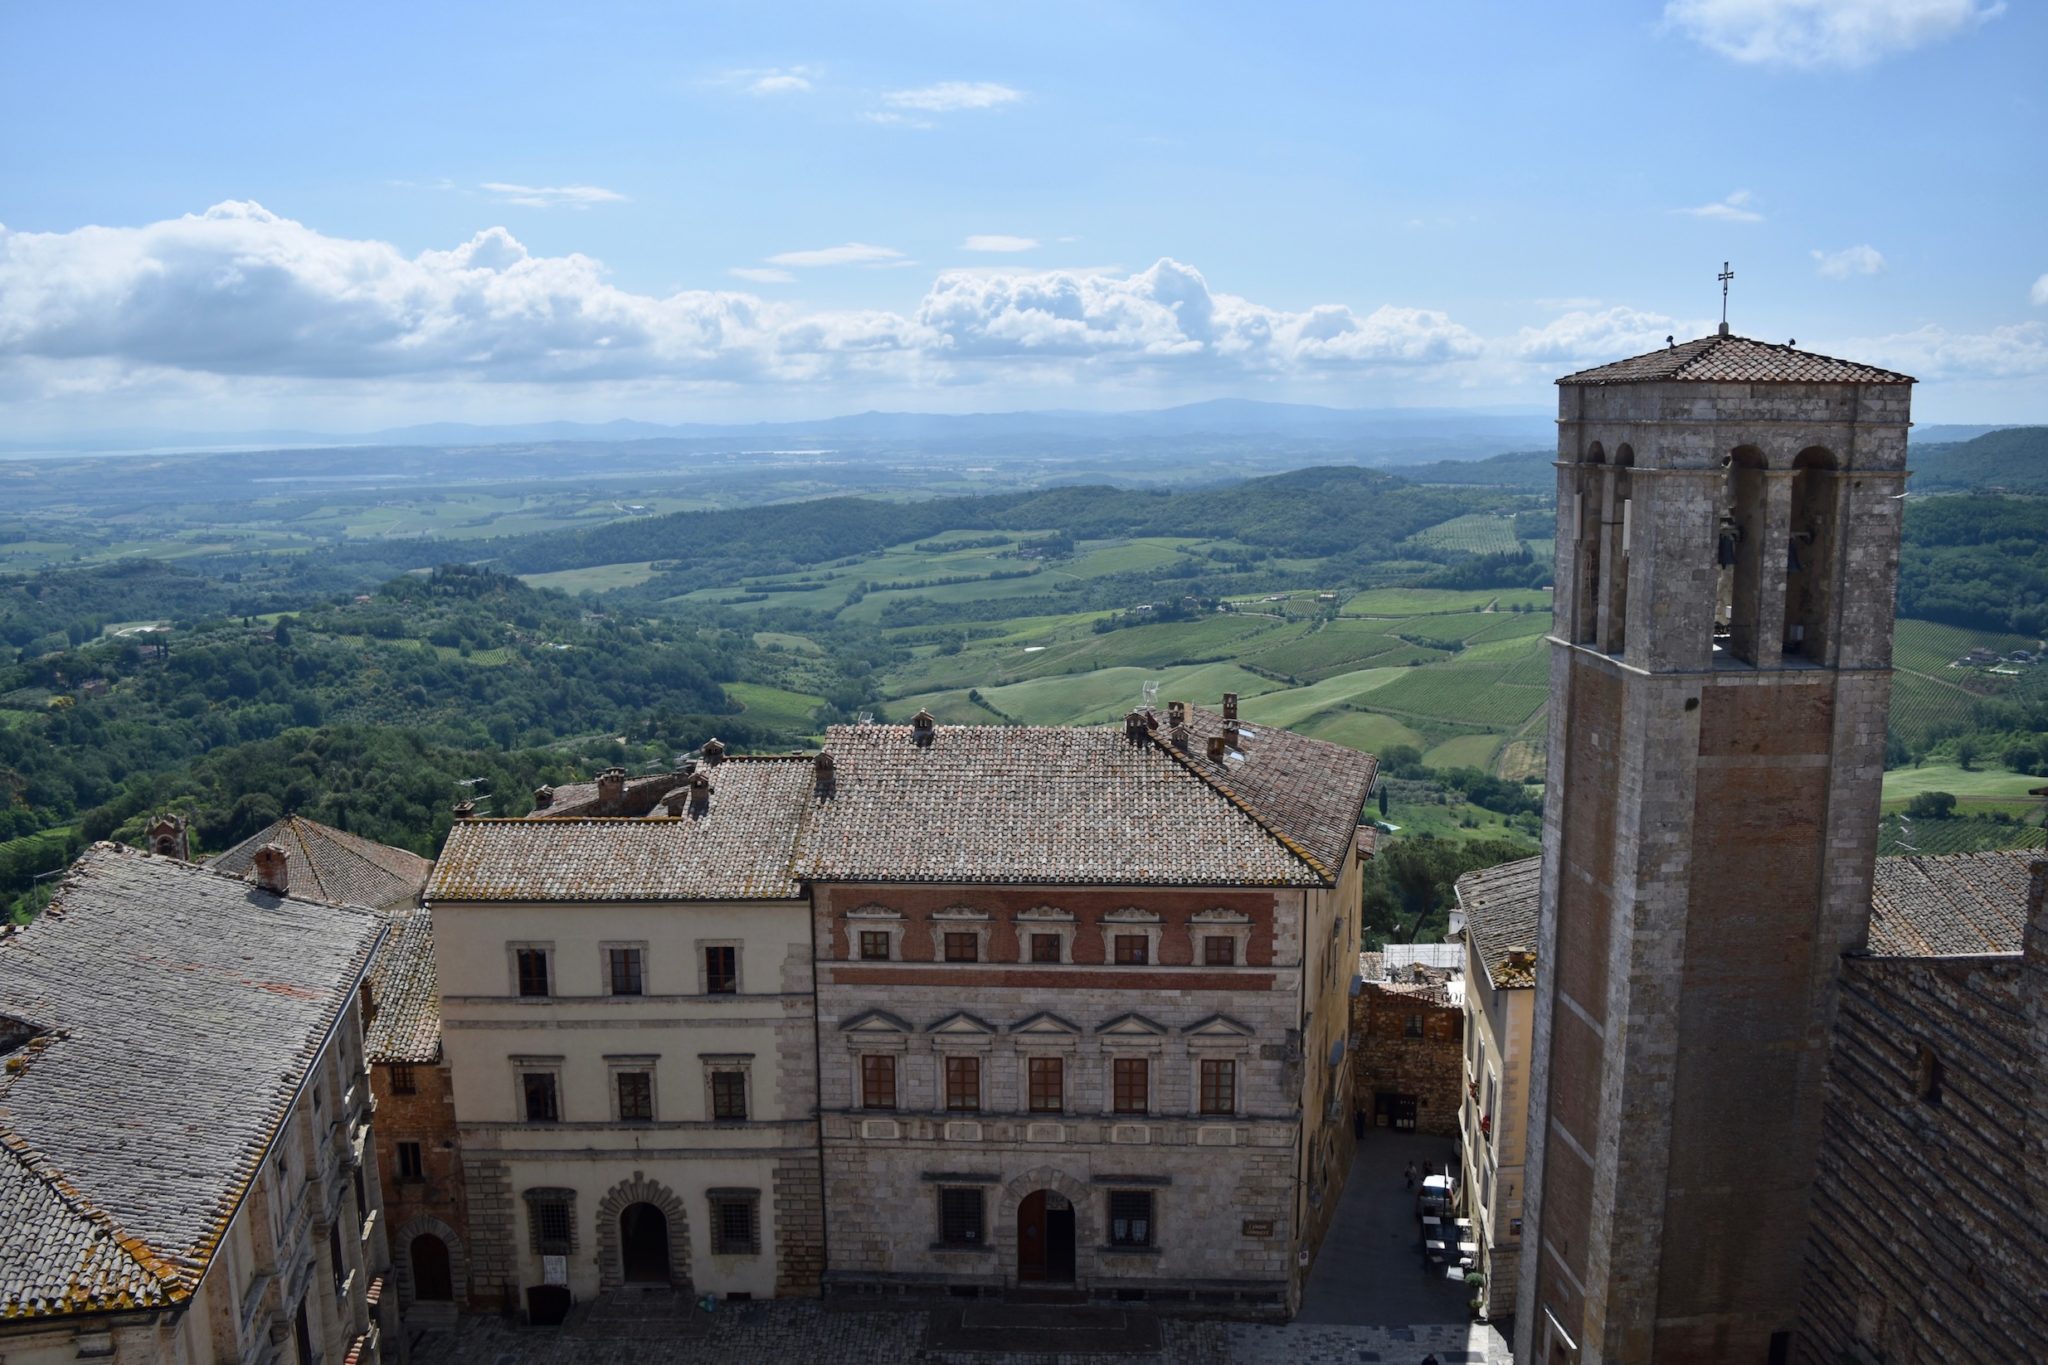 Views of the surrounding countryside from a tower in Montepulciano